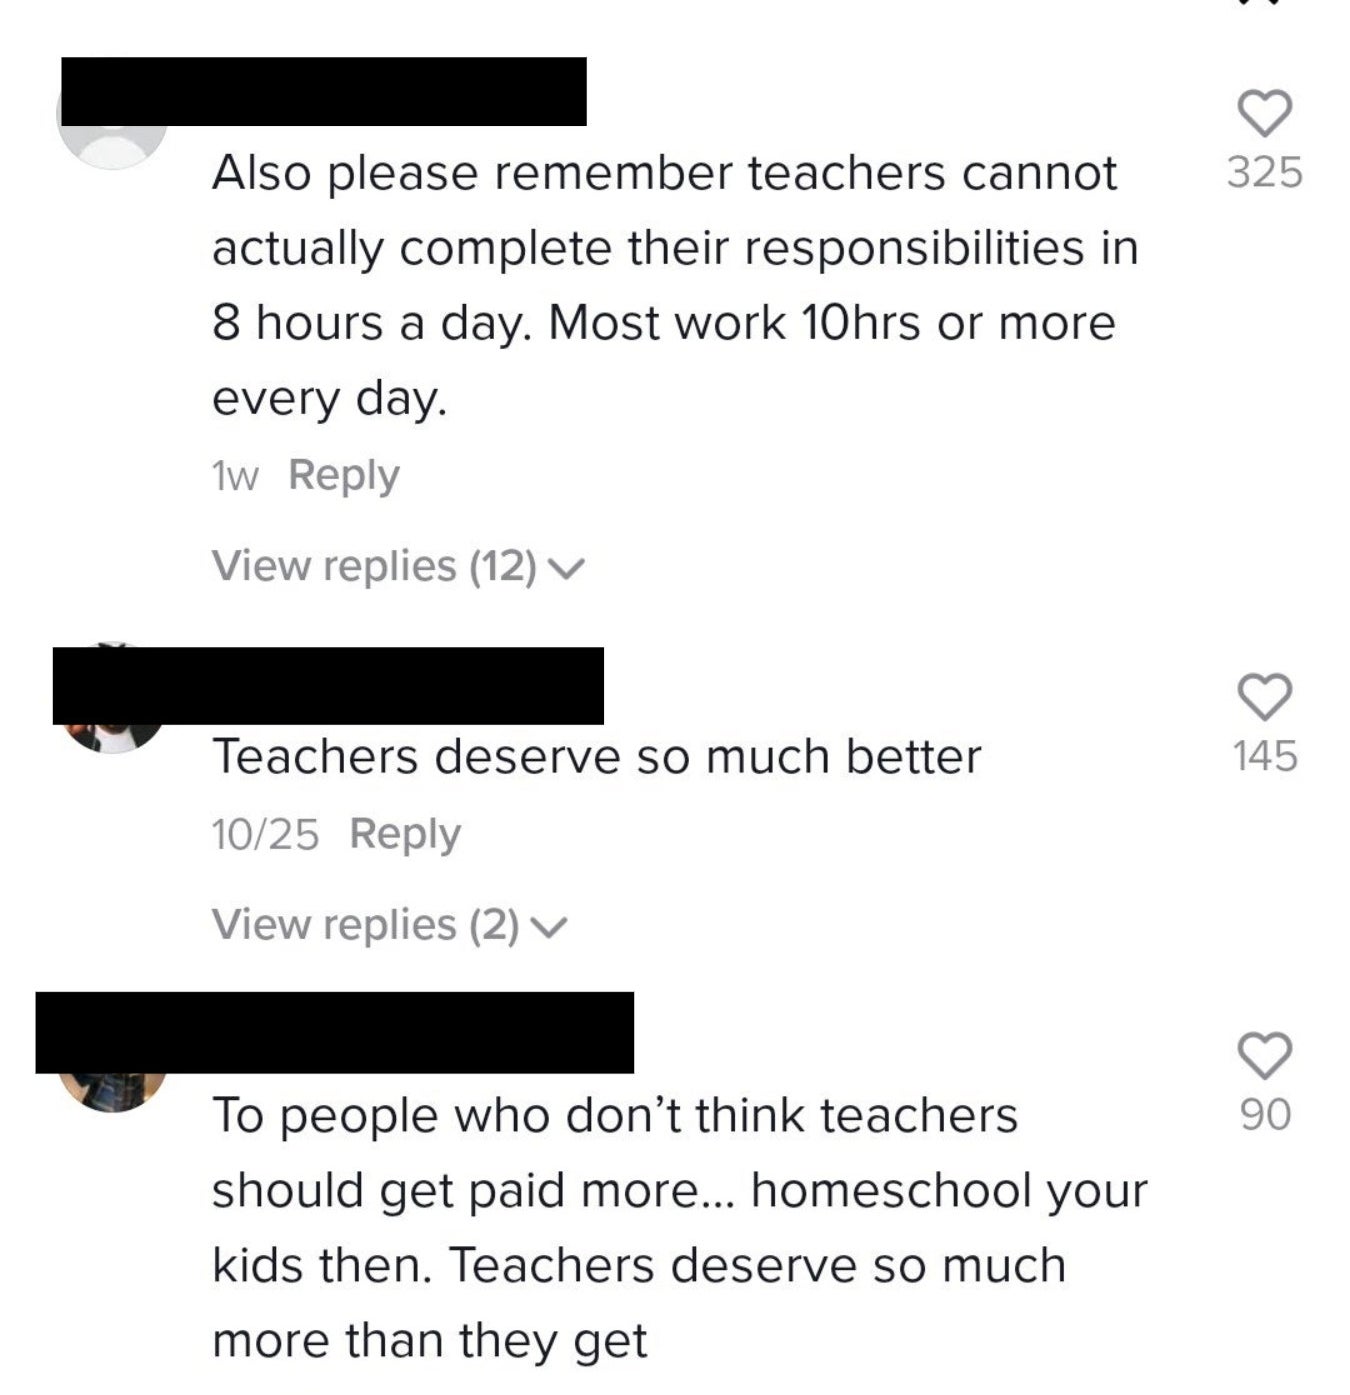 More comments of support: &quot;Teachers can&#x27;t actually complete their responsibilities in 8 hours a day; most work 10 hours or more&quot; and &quot;To people who don&#x27;t think teachers should get paid more, homeschool your kids then&quot;